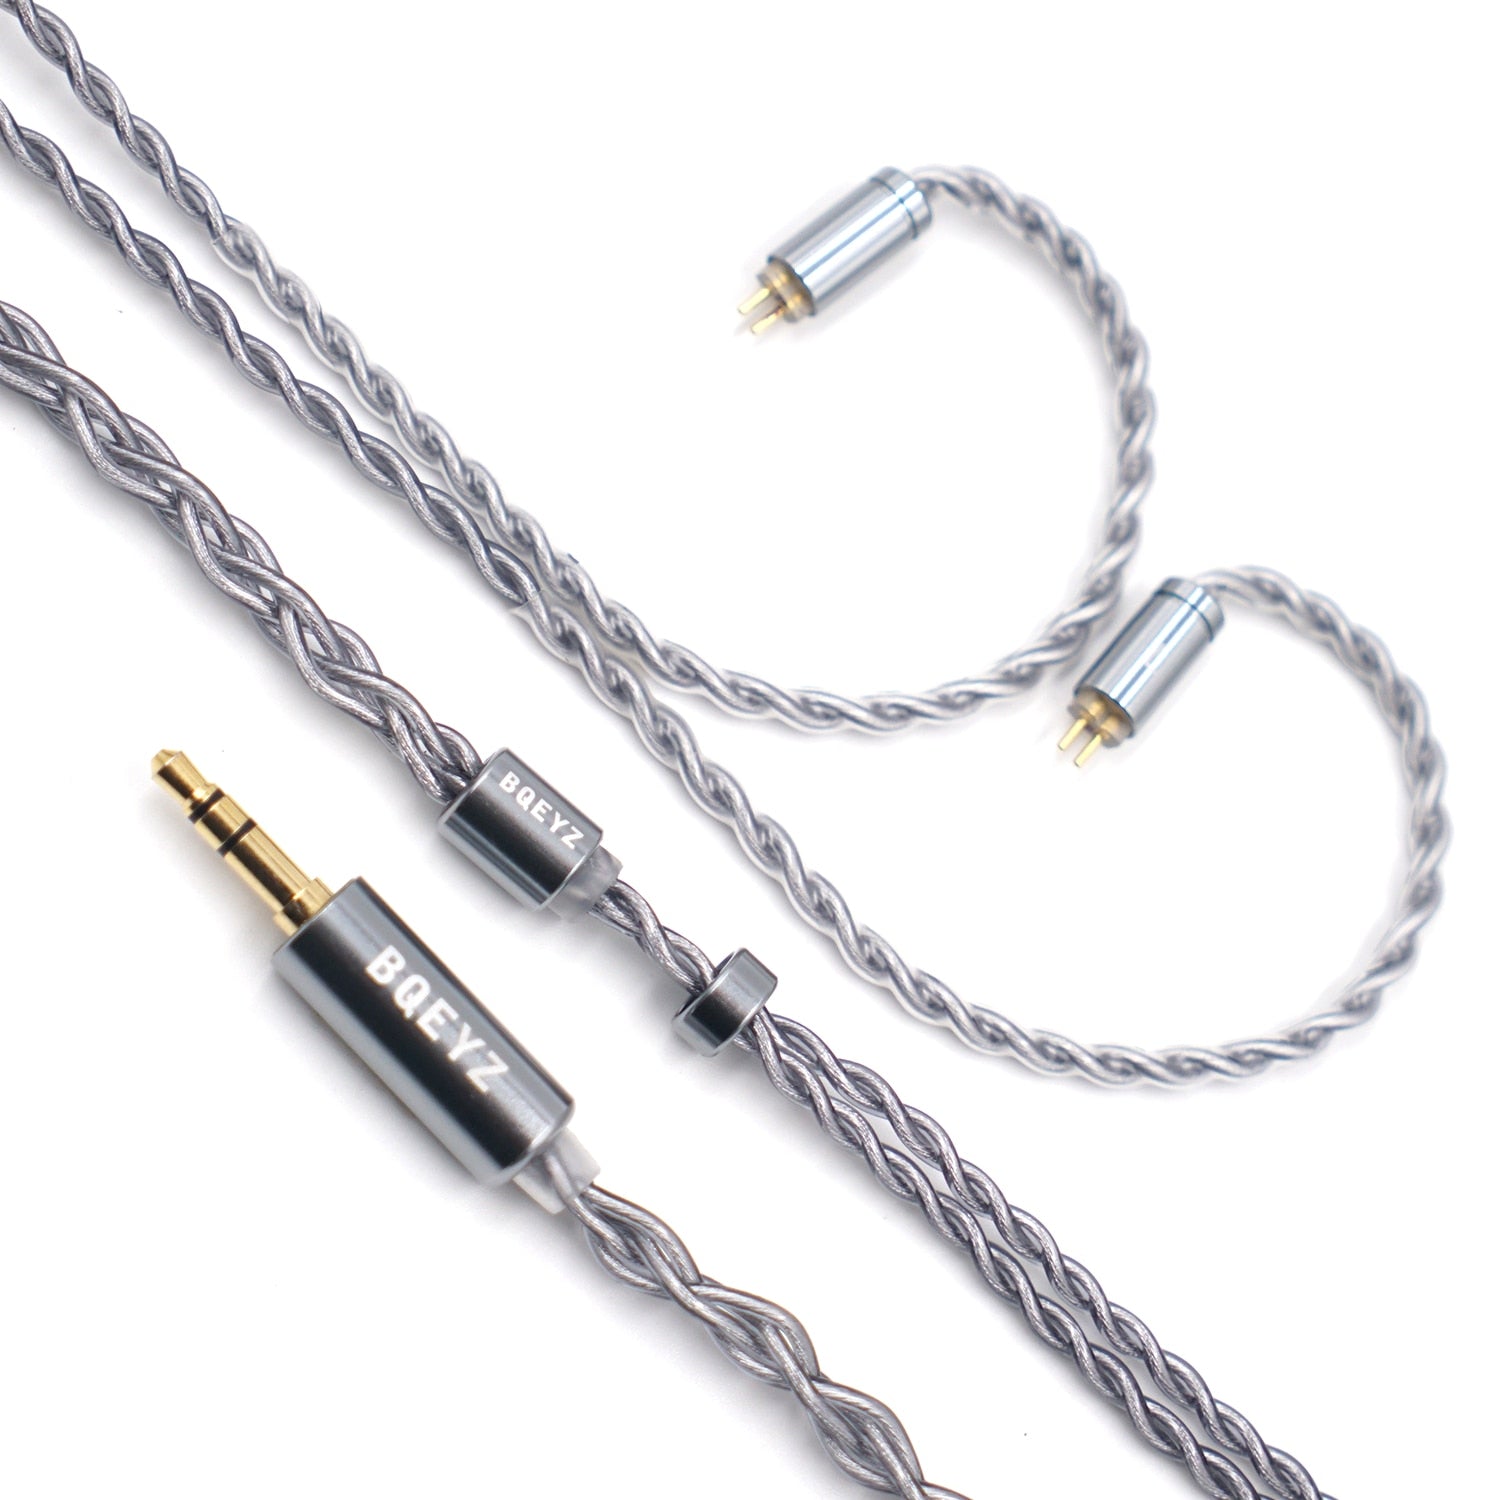 BQEYZ Winter Upgraded Cable Rime 0.78mm 2 Pin Single Crystal Copper Plated Silver Hybrid Earphone with Detachable Wire - The HiFi Cat